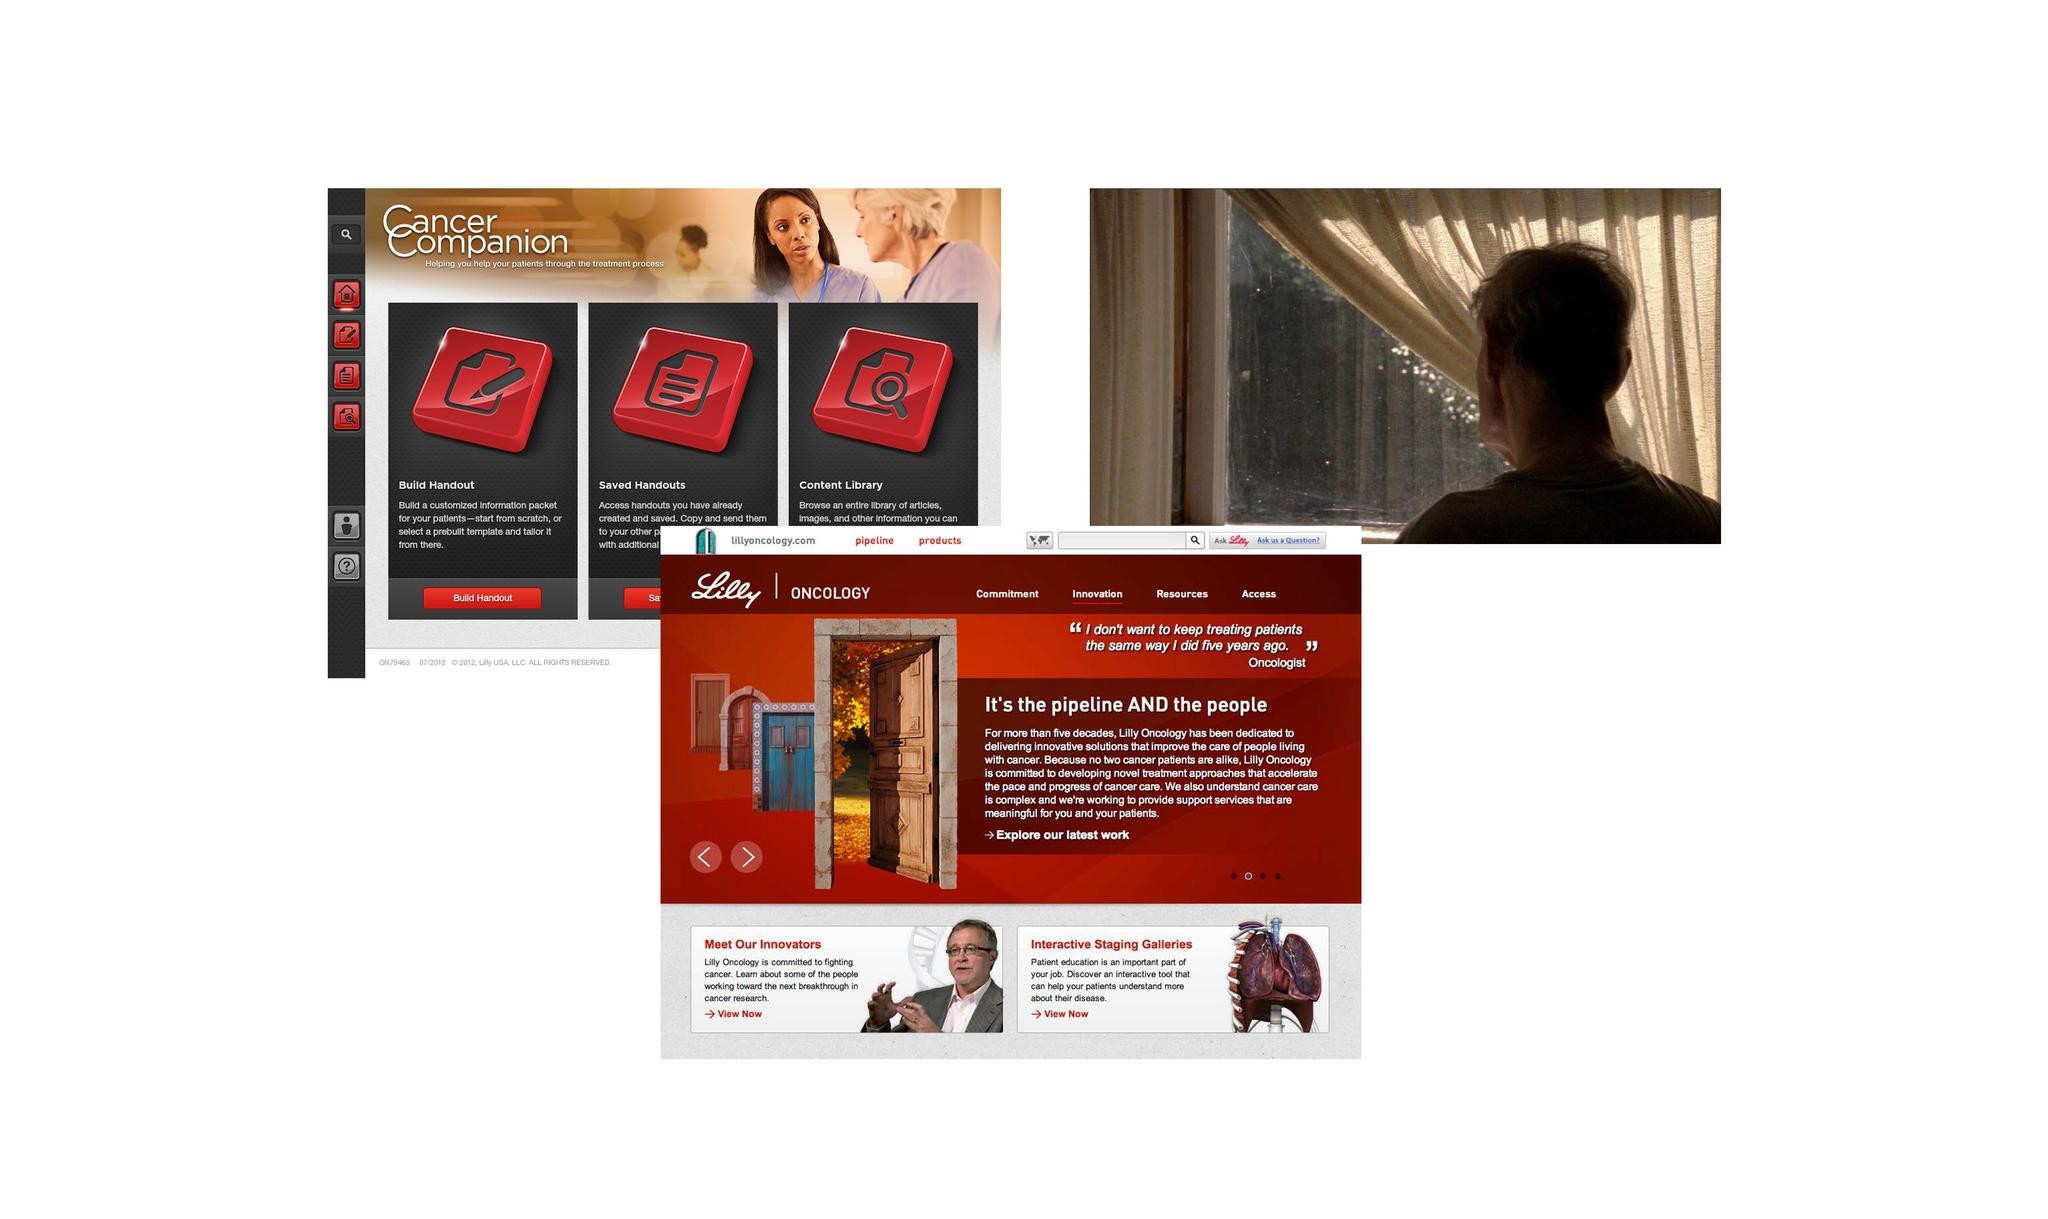 ELI LILLY ONCOLOGY FRANCHISE WEBSITE